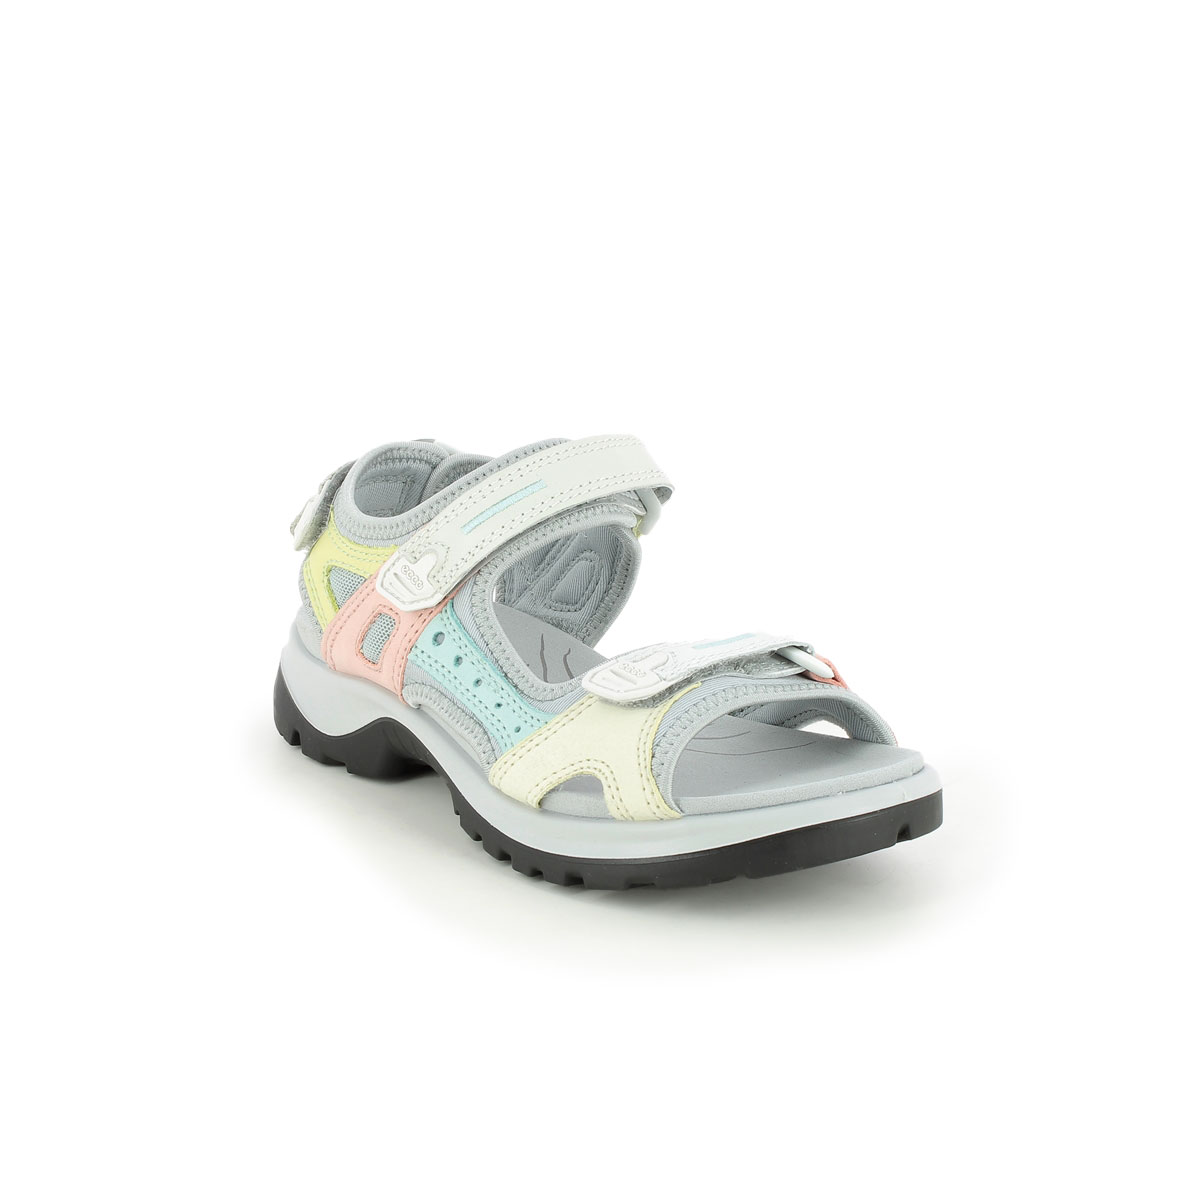 ECCO Offroad Lady 2 Off white multi Womens Walking Sandals 822083-51902 in a Plain  in Size 37